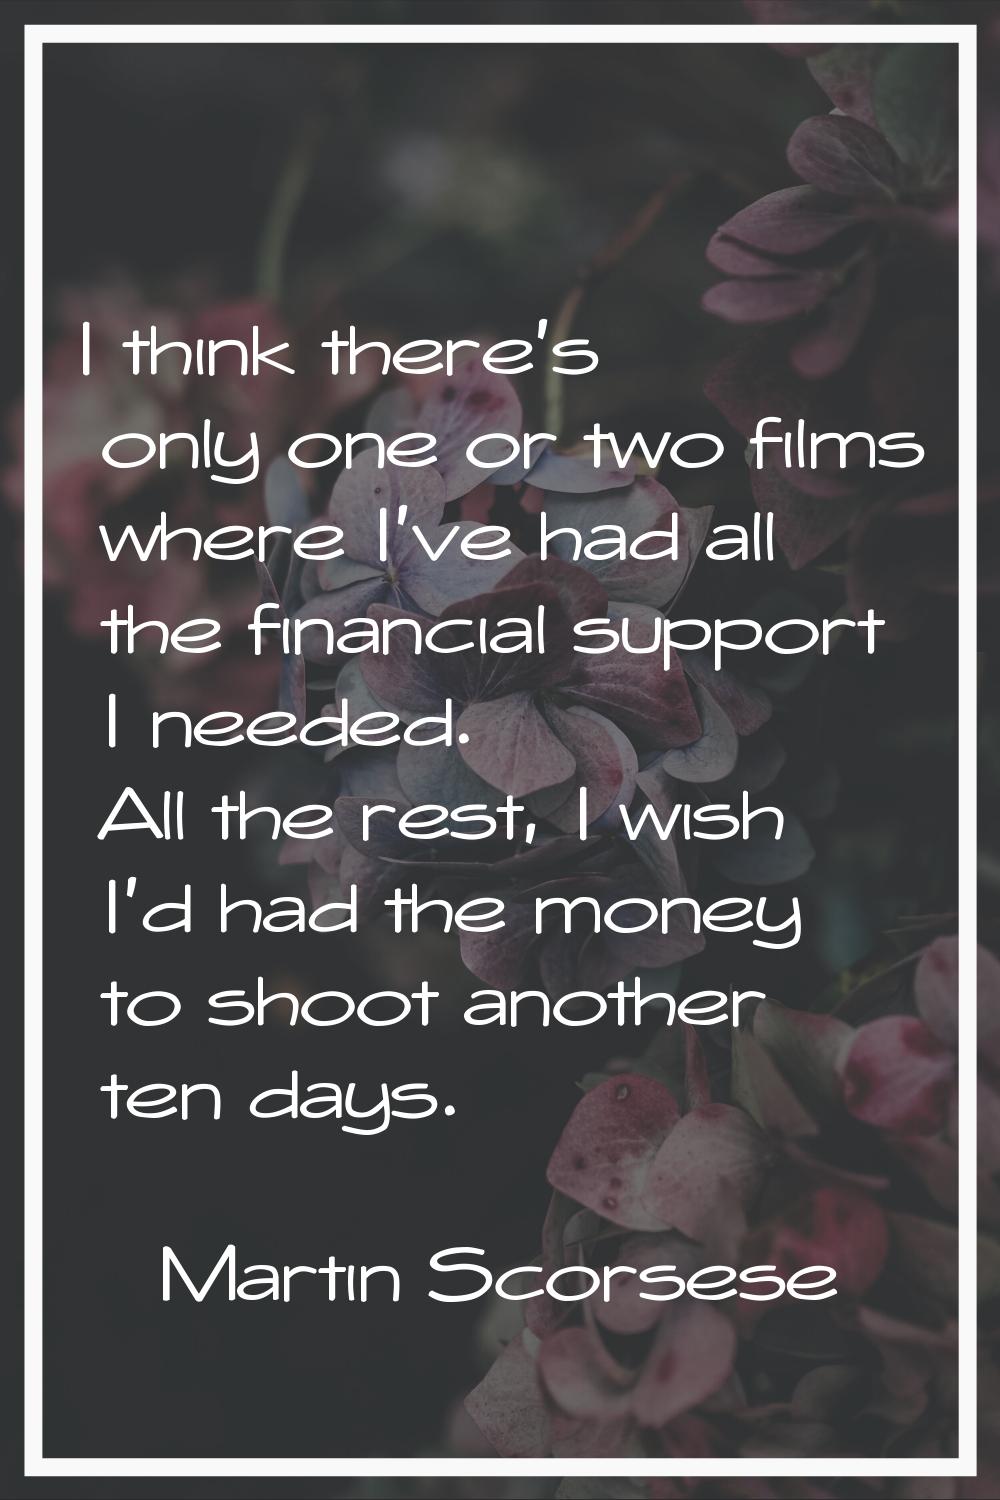 I think there's only one or two films where I've had all the financial support I needed. All the re